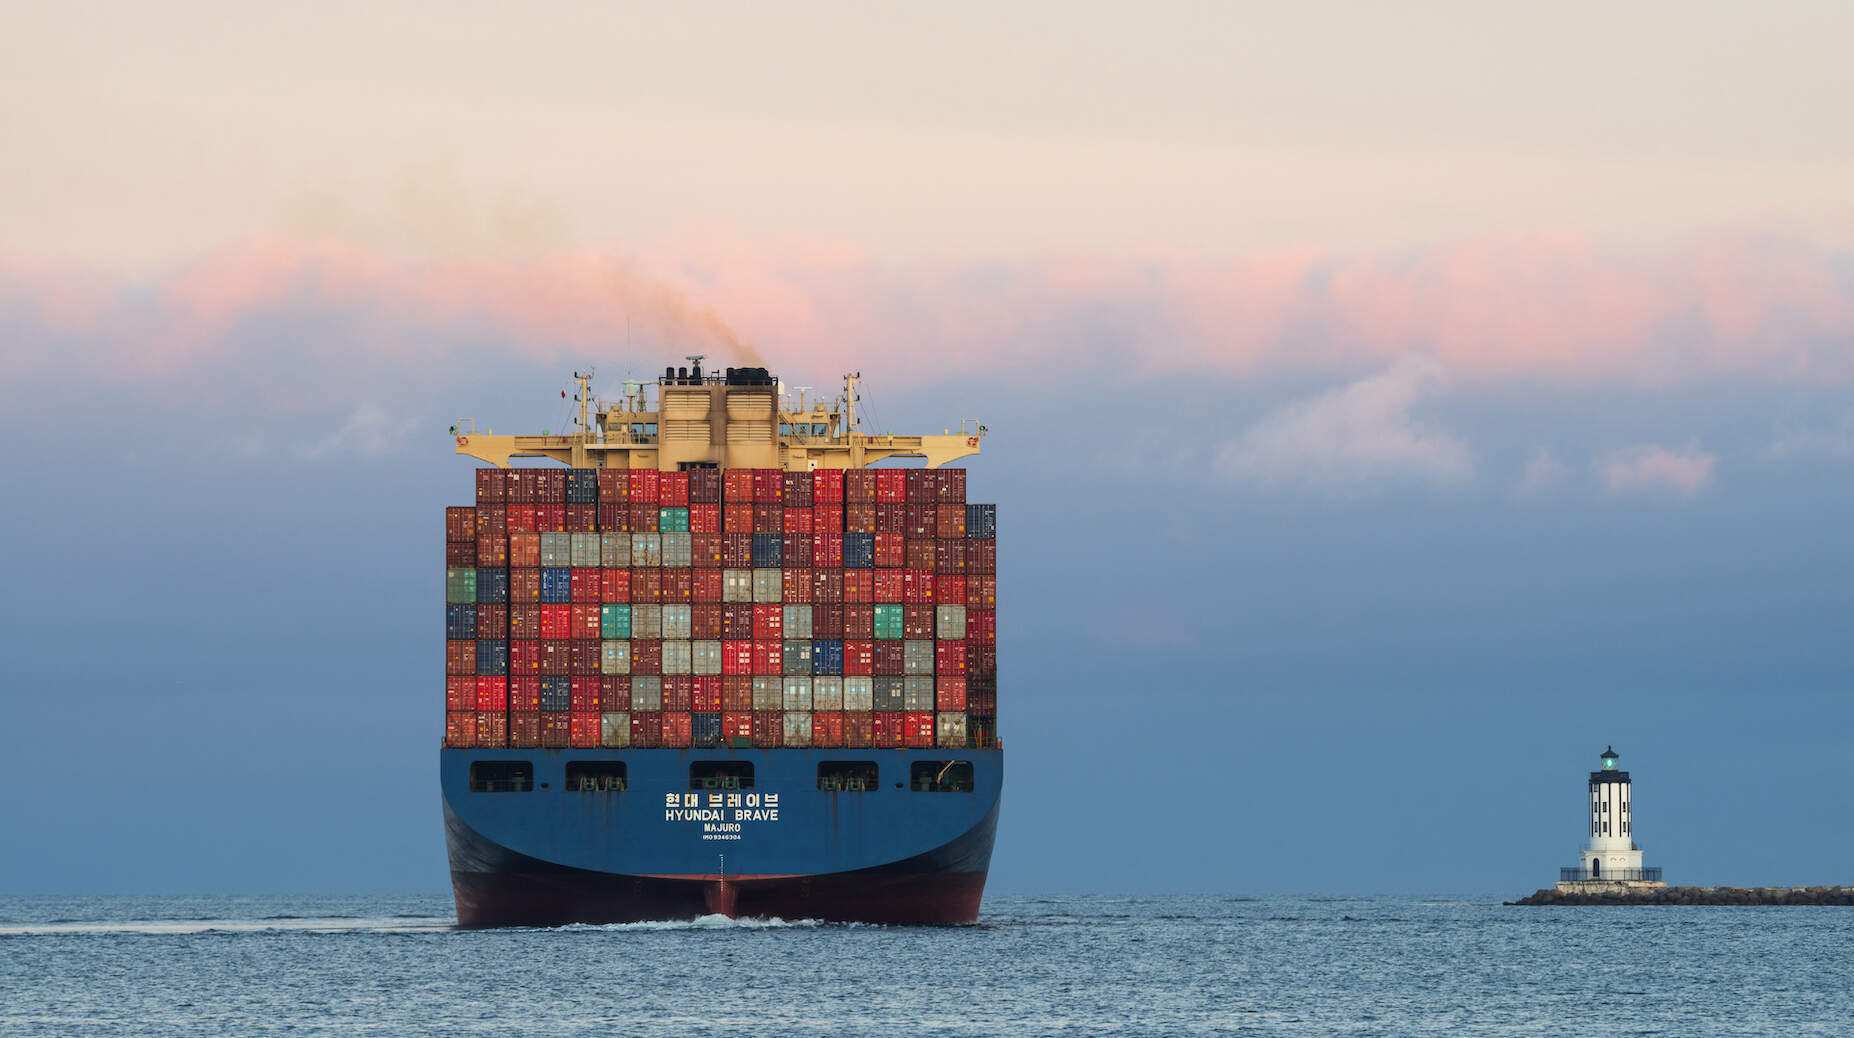 The months-long sea freight imbalance has hobbled huge swaths of the supply chain. What, or who, is causing it?